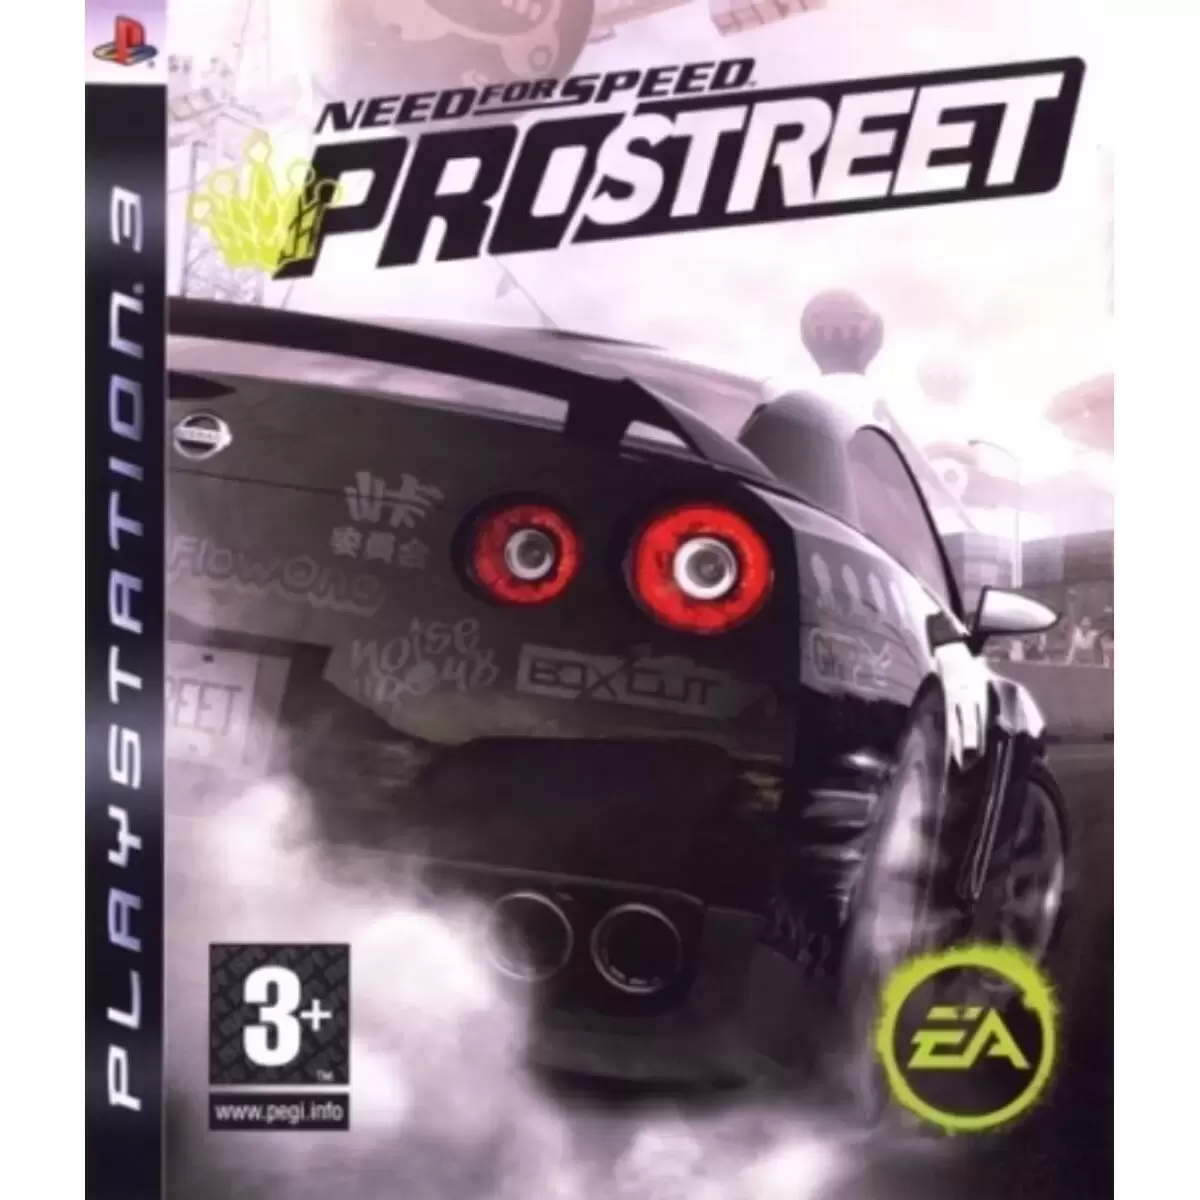 Jeux PS3 - Need for speed Pro street